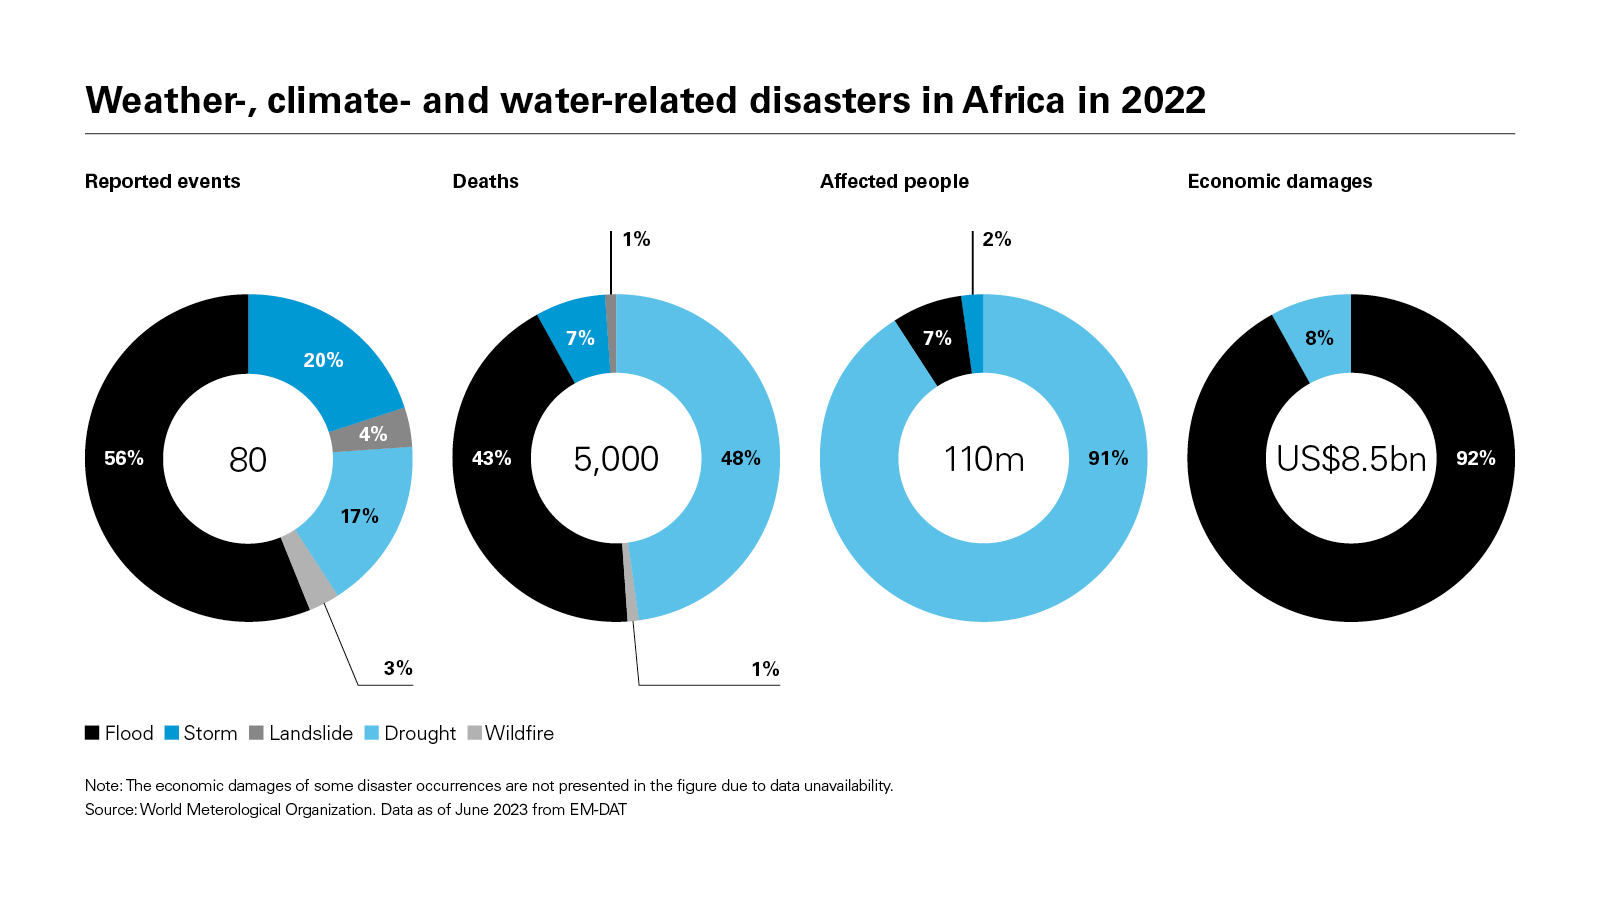 Weather-, climate- and water-related disasters in Africa in 2022